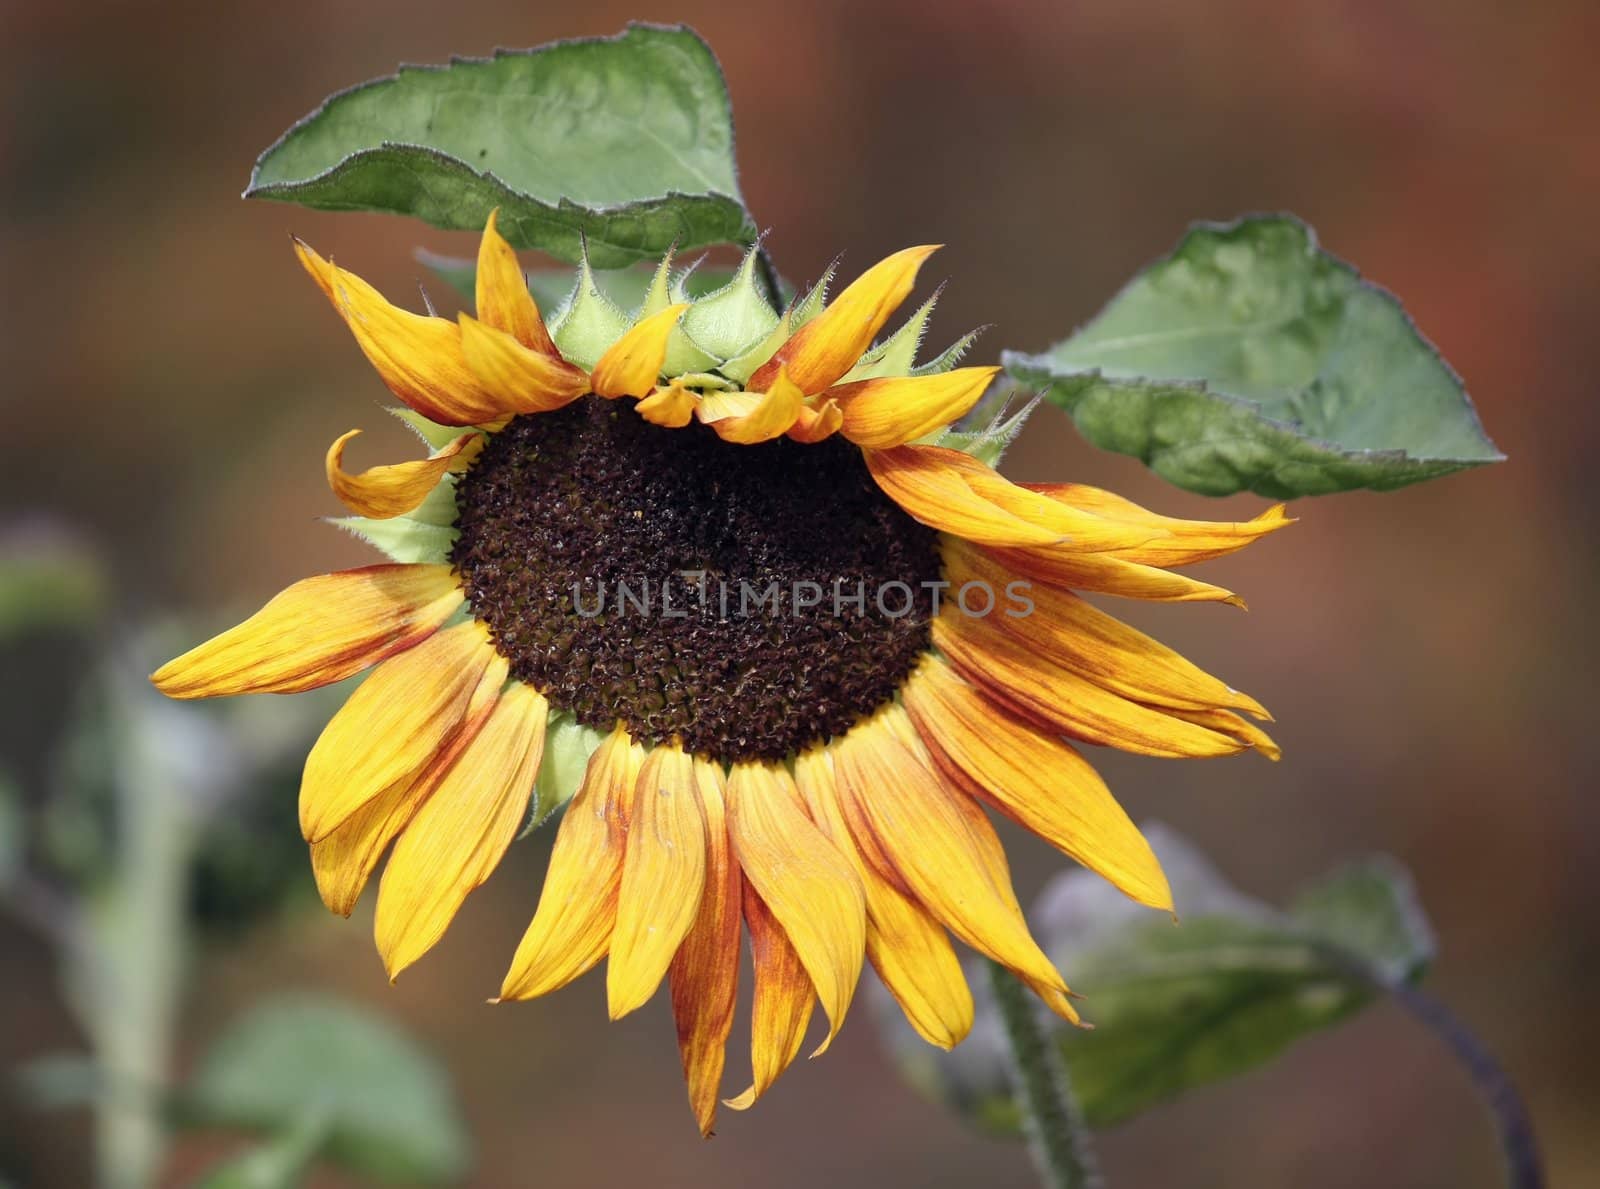 There has come summer. The sunflower has blossomed. At it very beautiful and unusual flowers. We admire them.